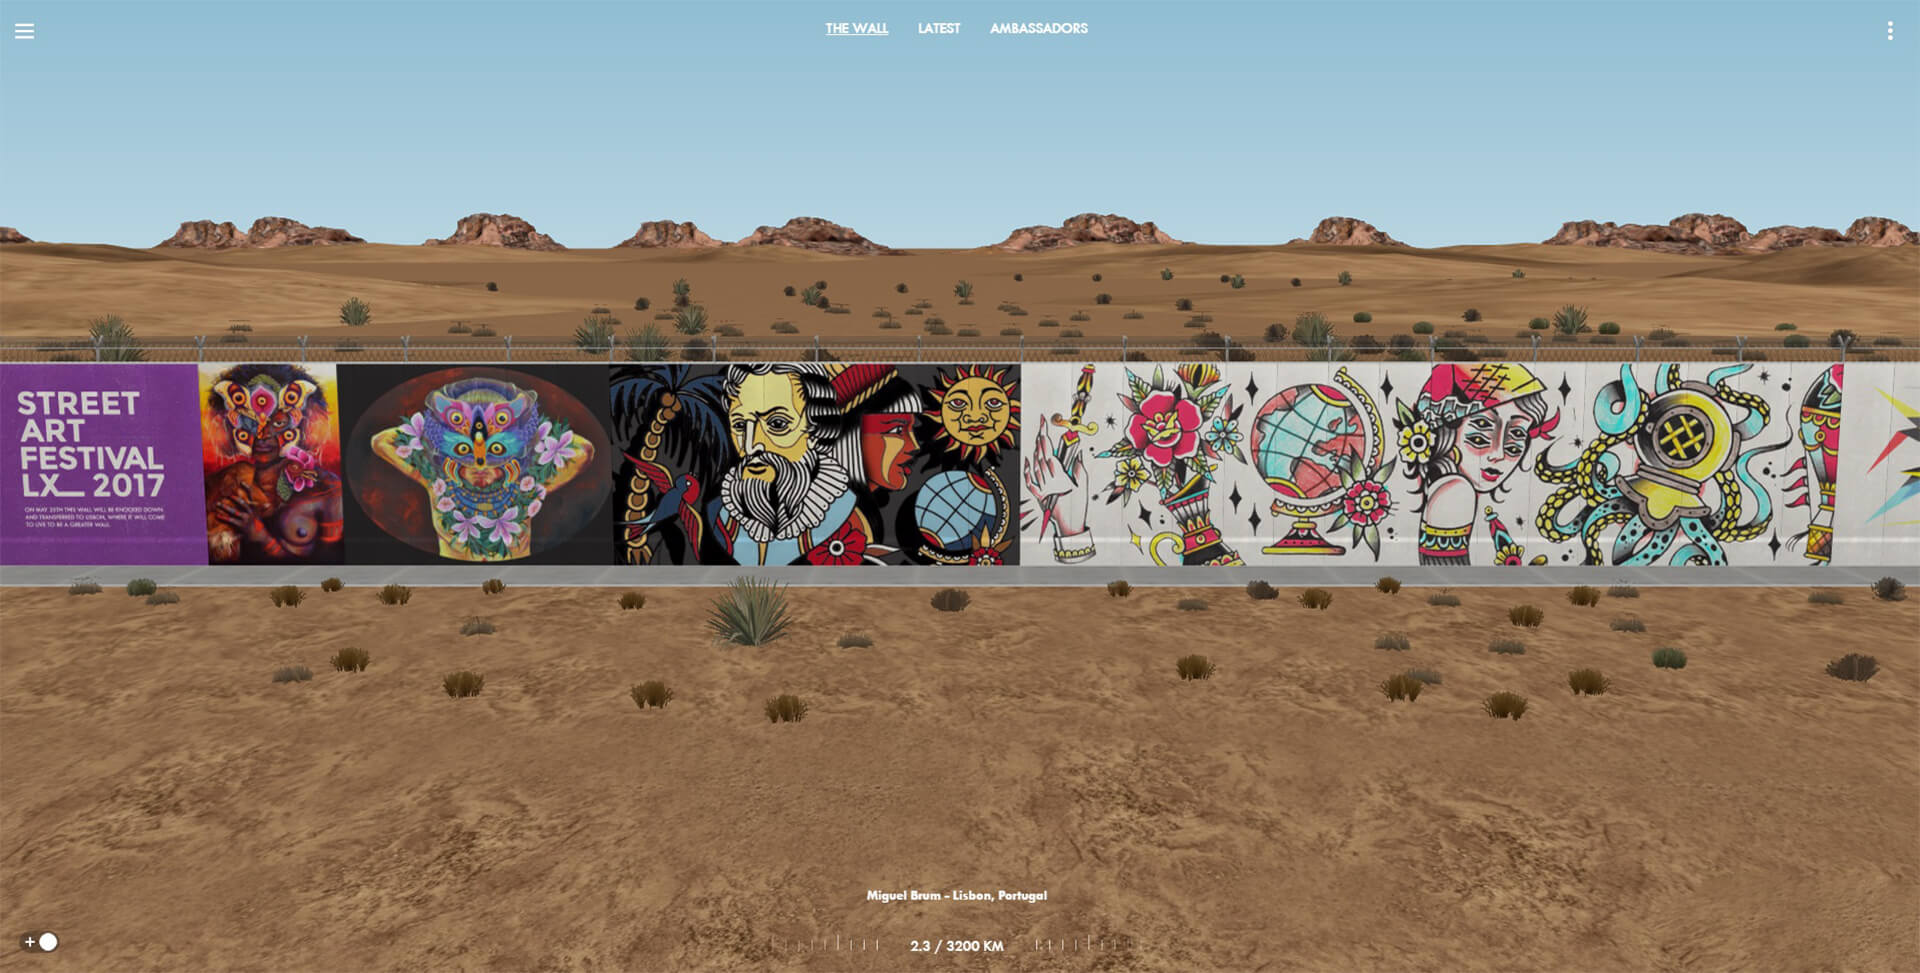 Website screenshot of the integrated campaign for MURO